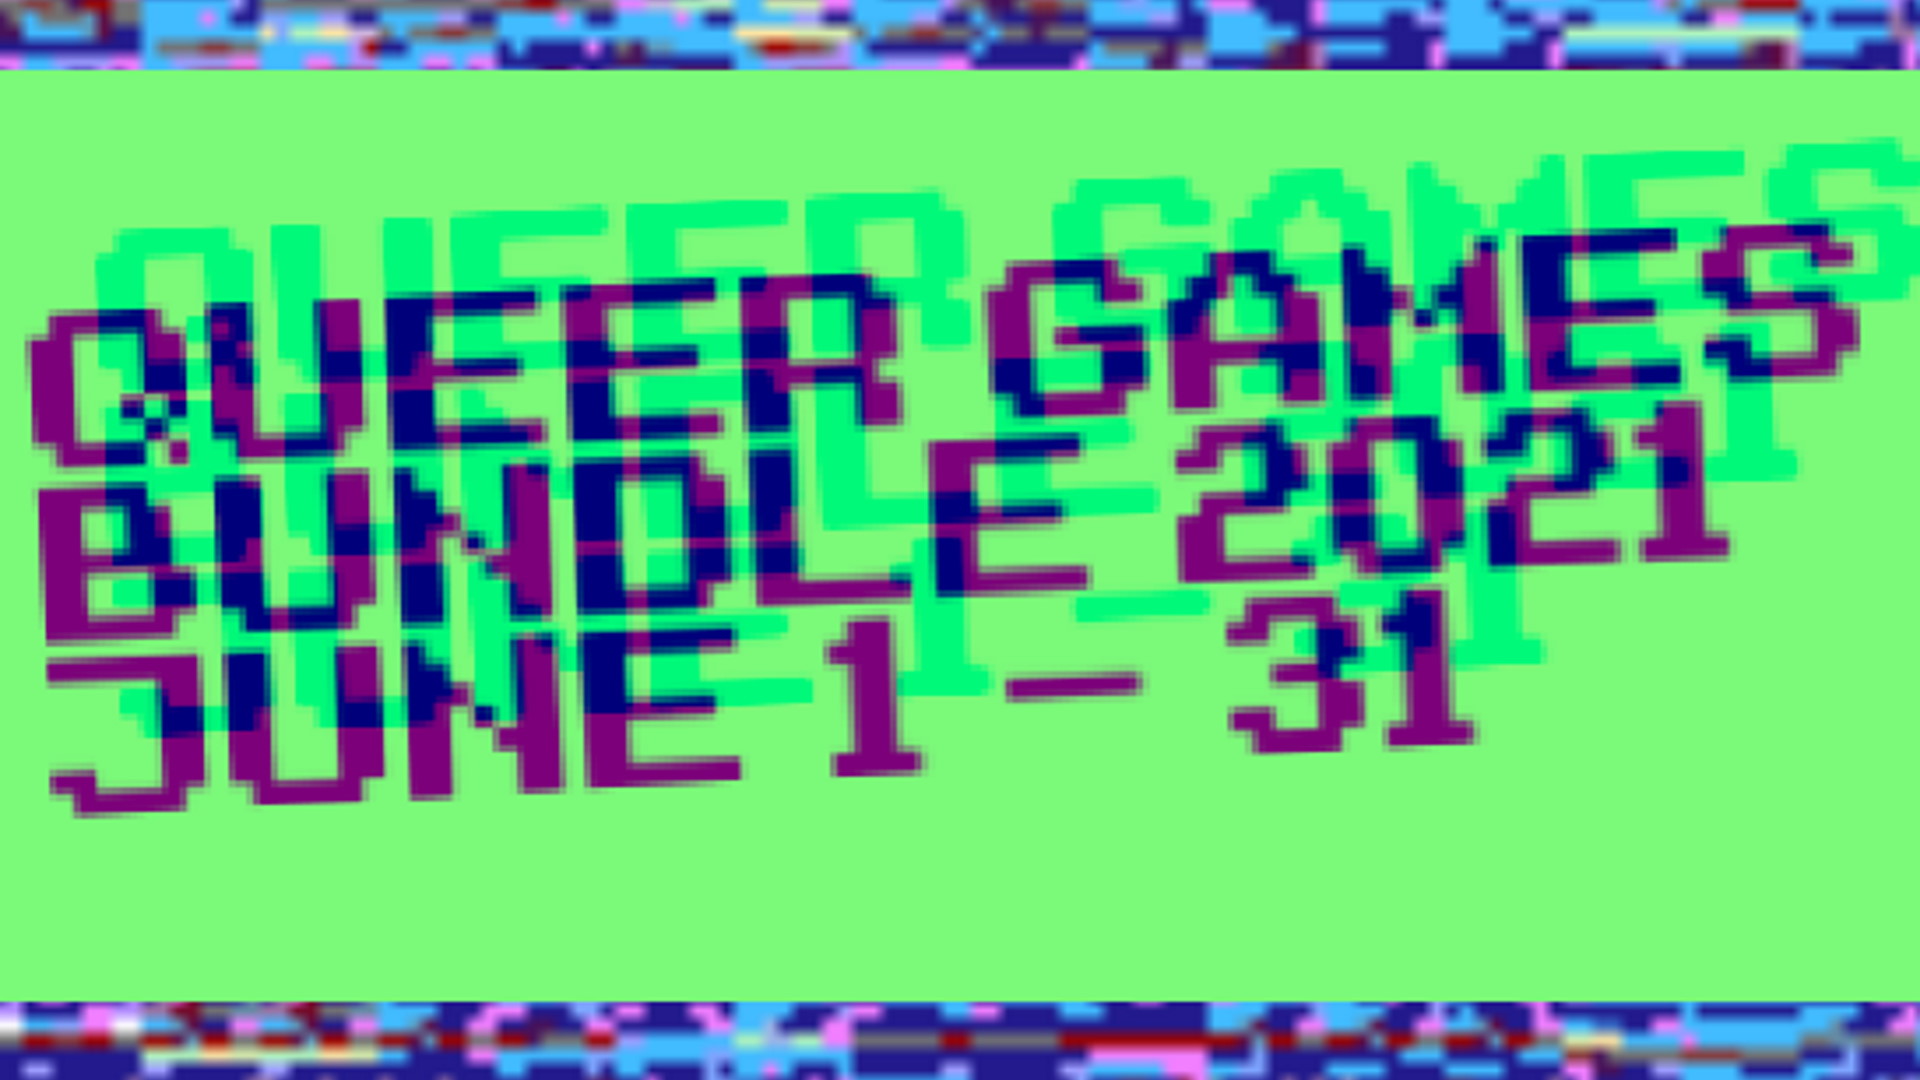 Queer Games Bundle 2021 on Itch.io will fill your summer with 236 games